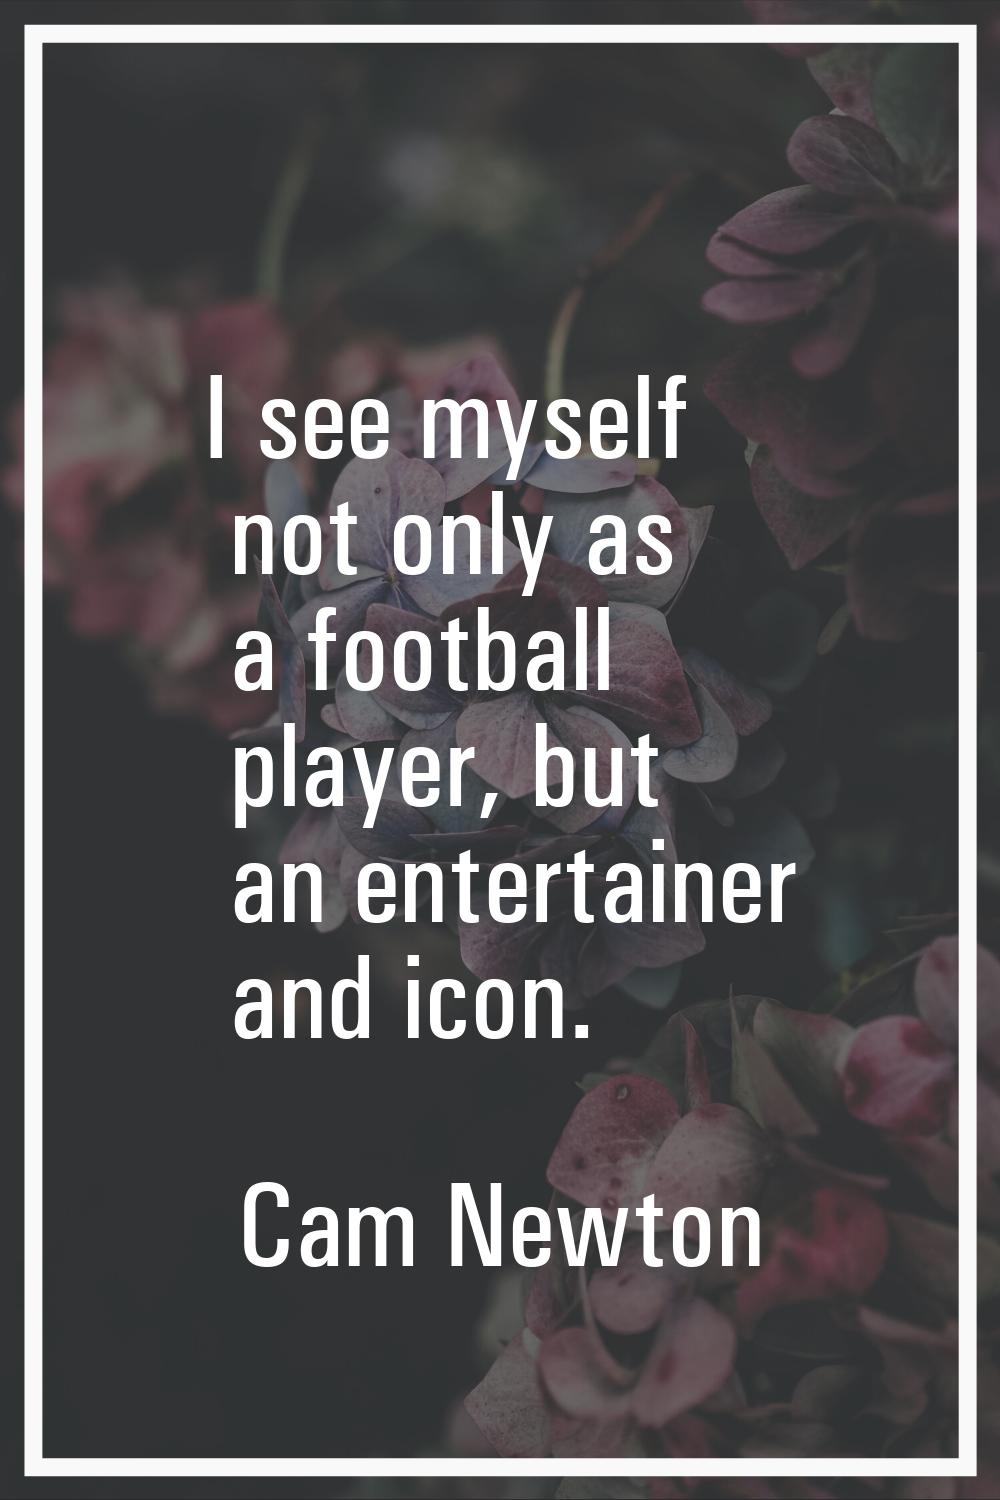 I see myself not only as a football player, but an entertainer and icon.